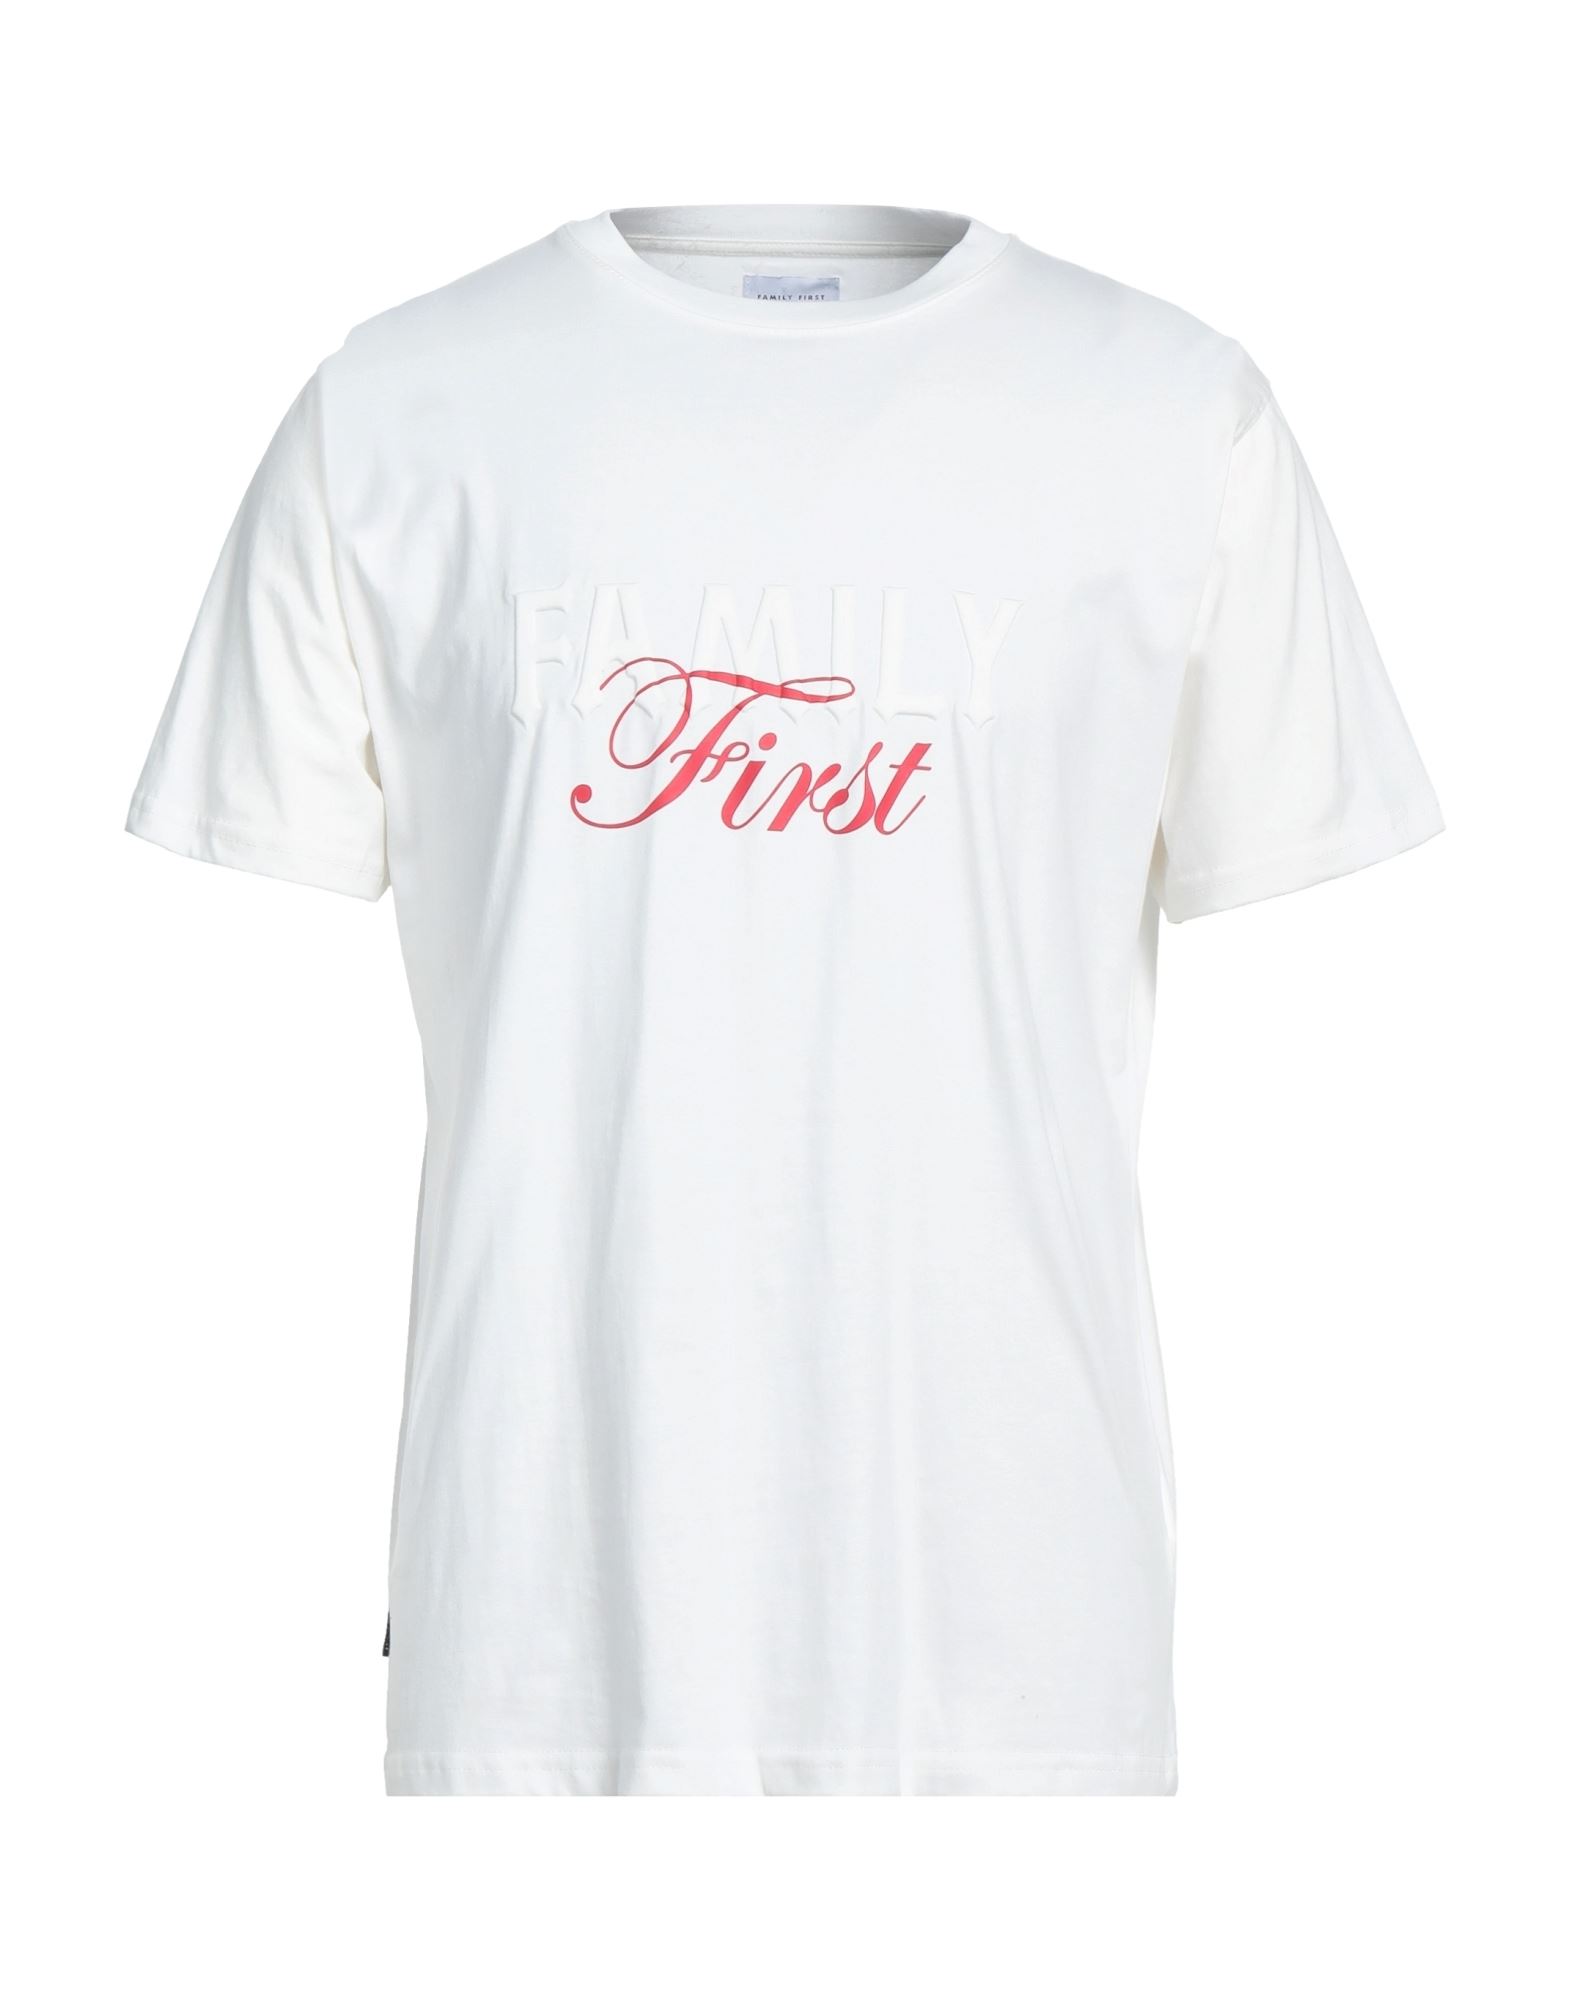 Family First Milano T-shirts In White